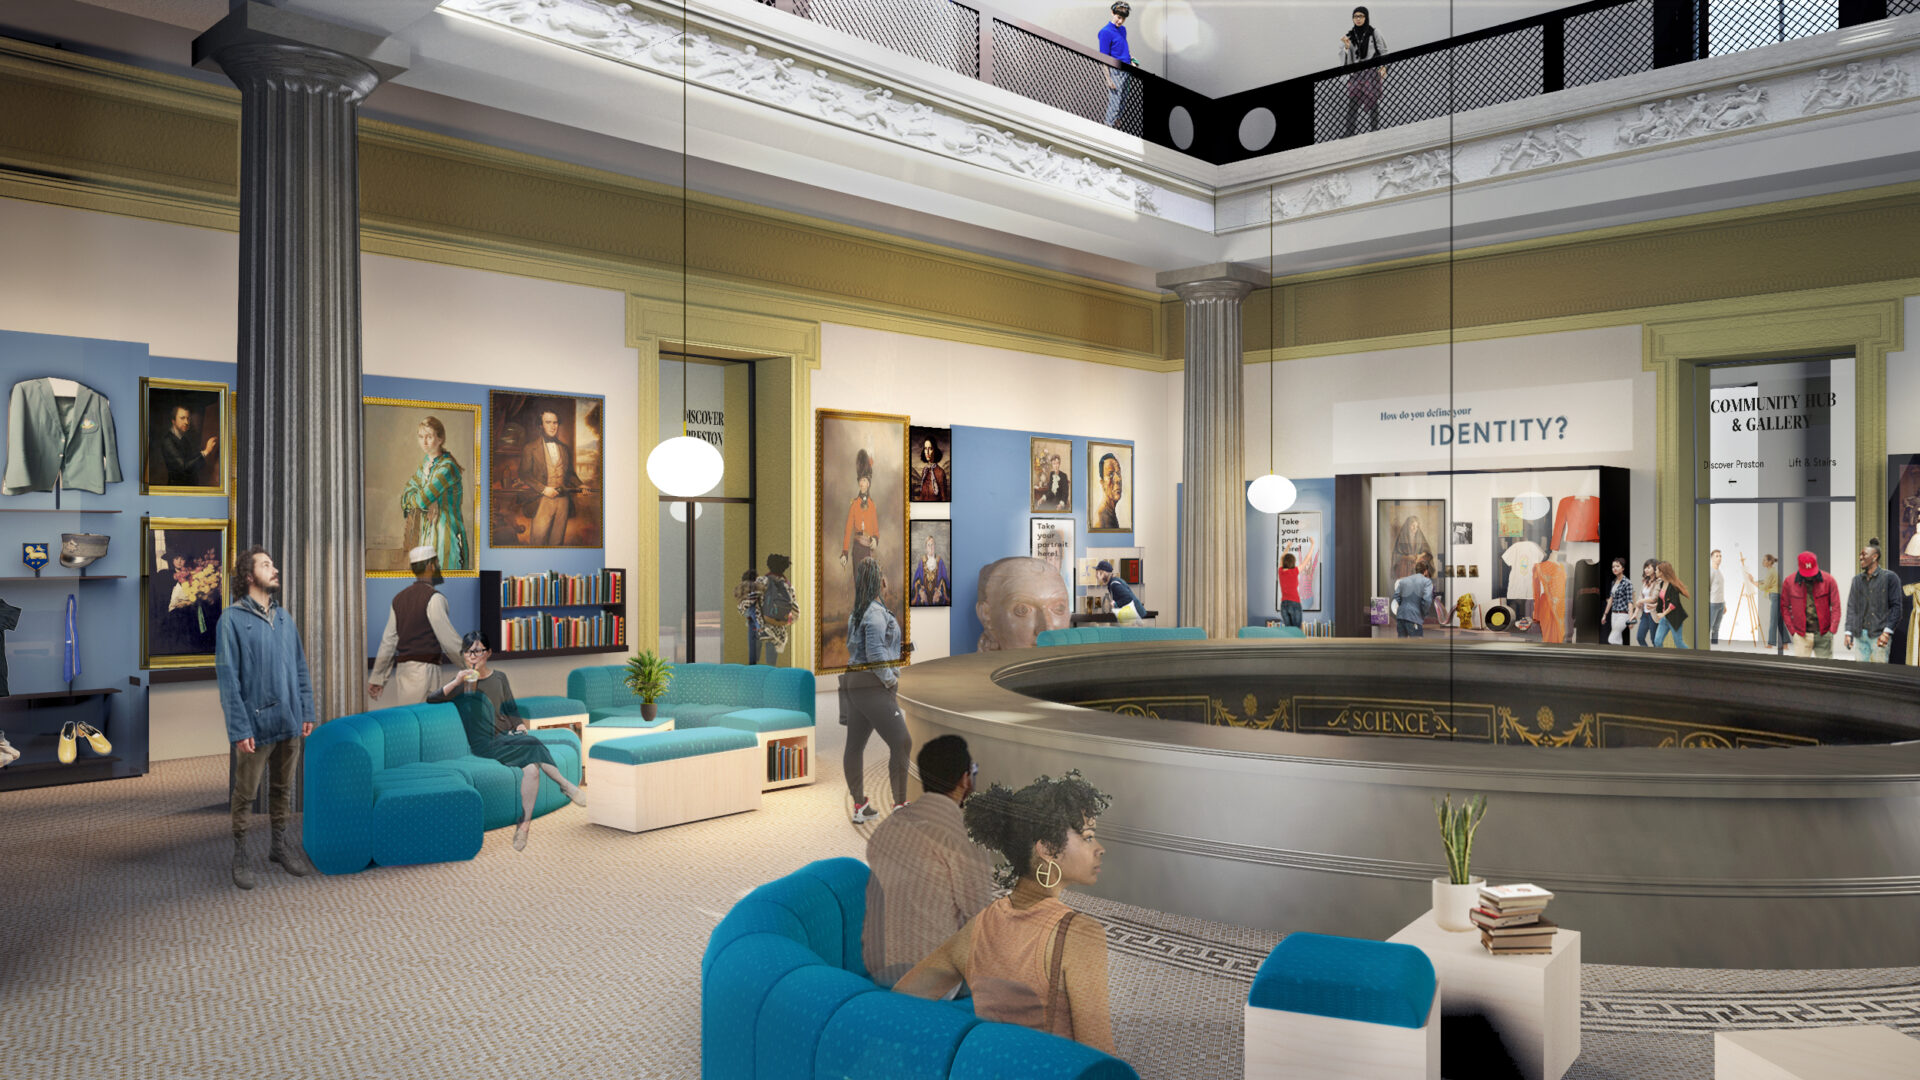 Image of The Harris First Floor Rotunda with blue sofas and collection items in showcases.